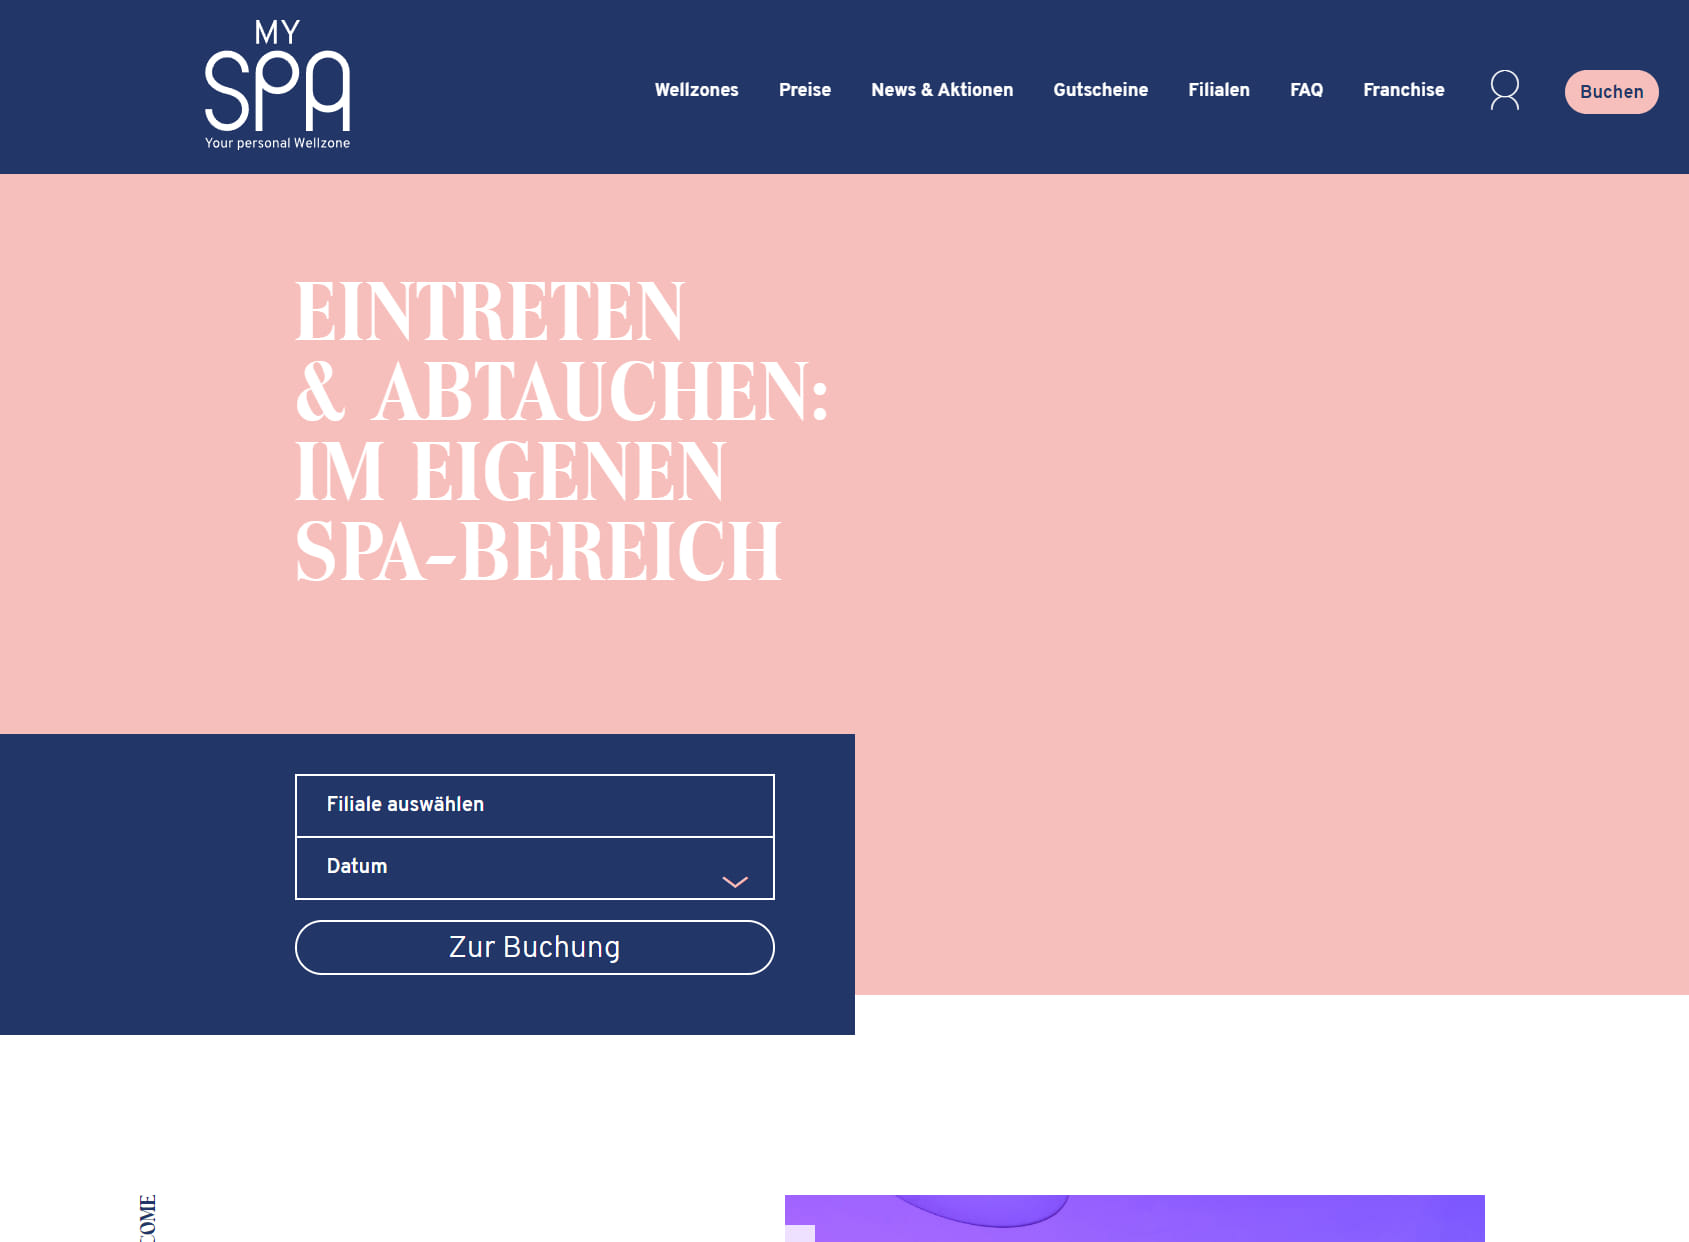 MySpa - Your personal Wellzone | Wellness & Spa in Hannover